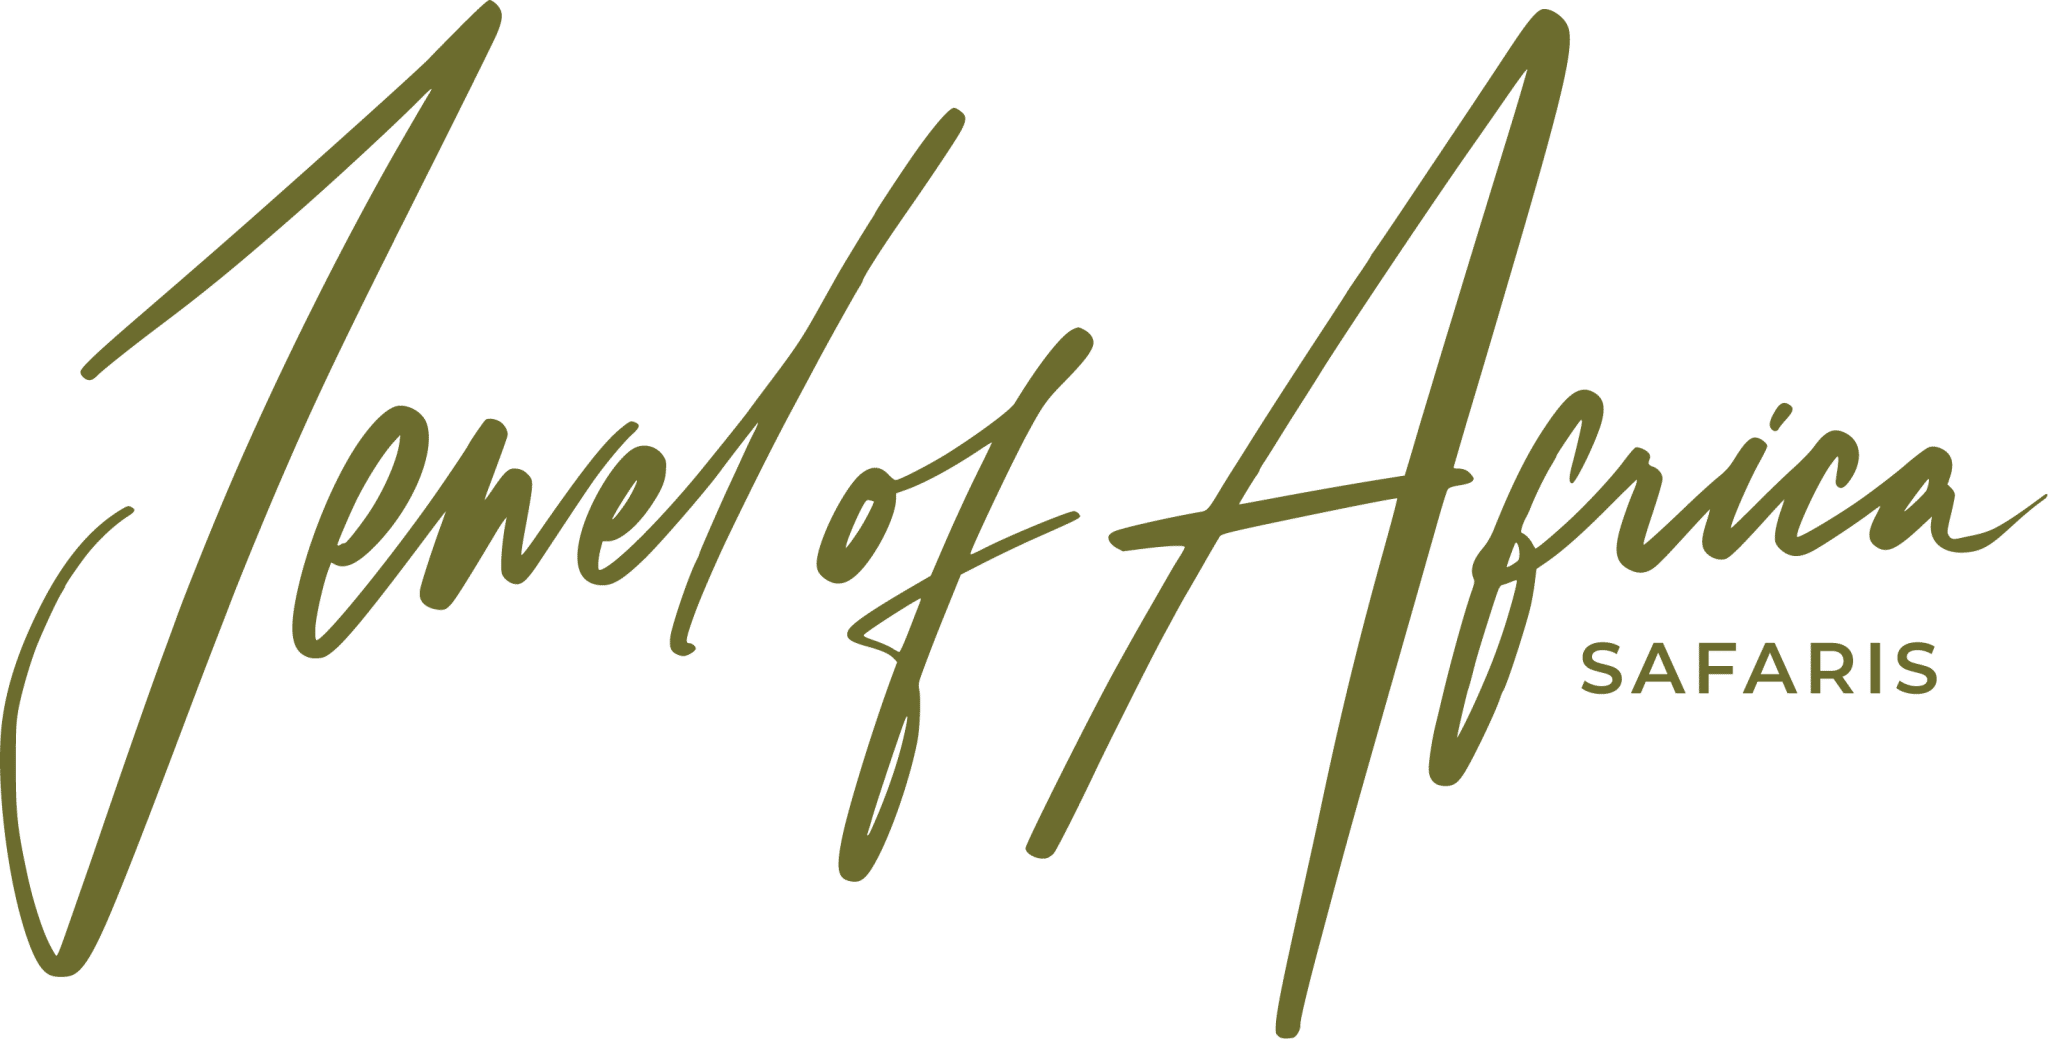 Elegant header logo for "Jewels of Africa Safaris" in stylized green script. The main text flows ornately with "Safaris" in a smaller, simpler font beneath.